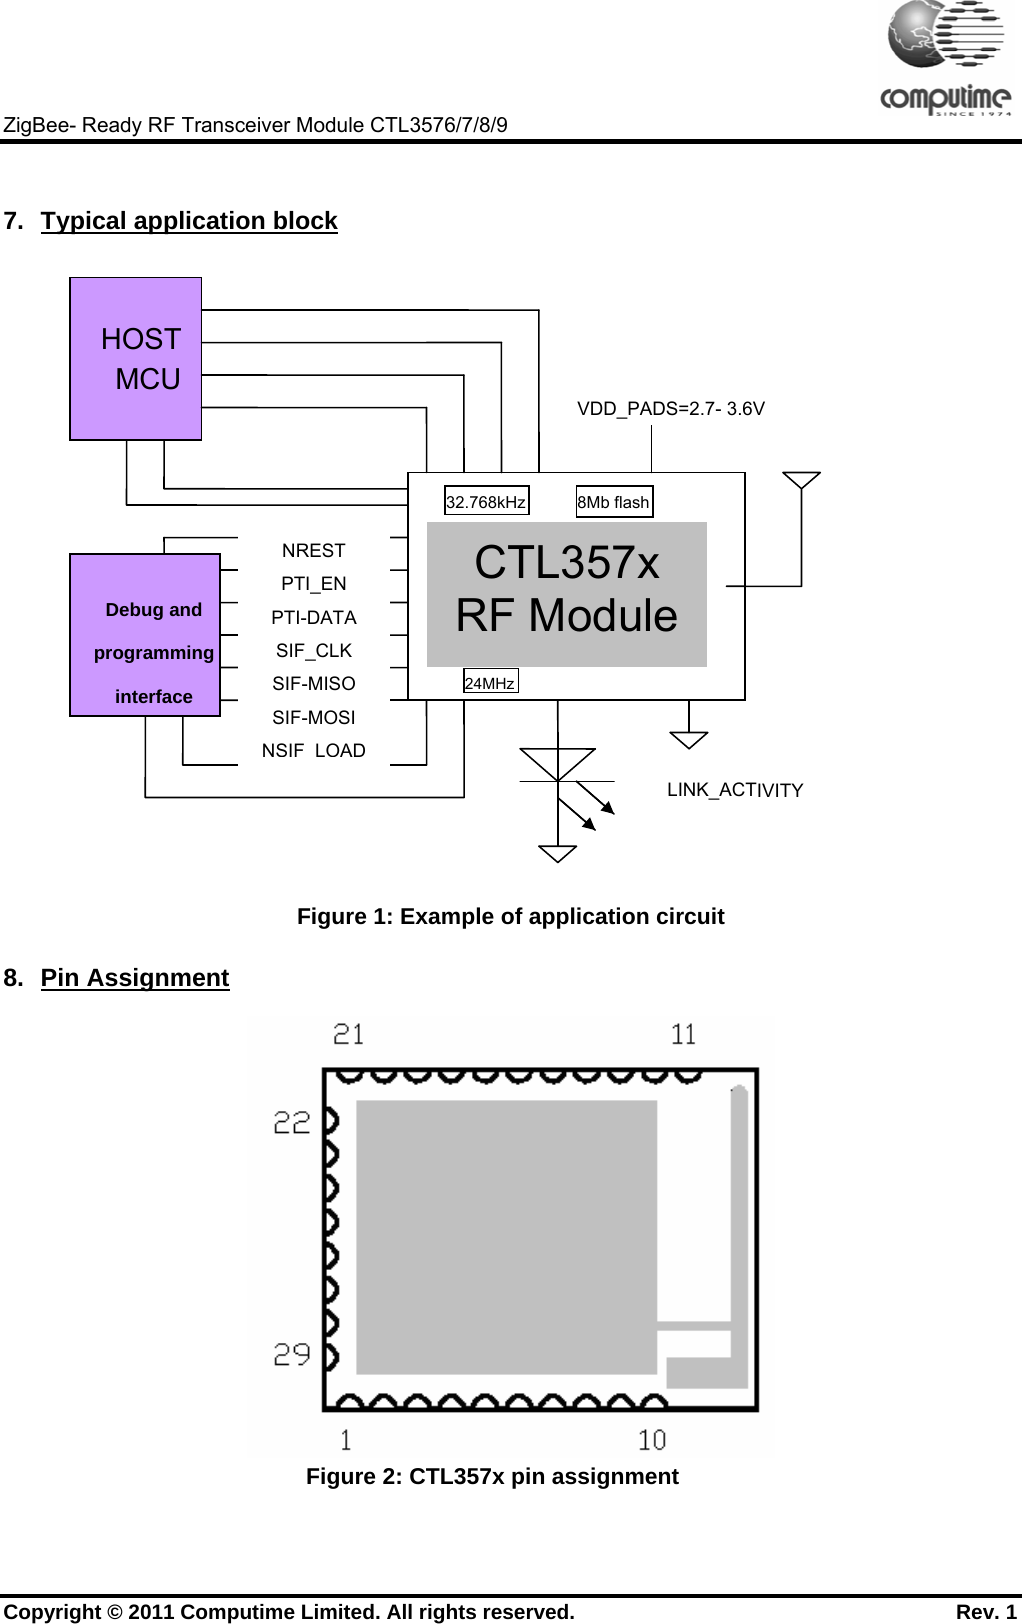     ZigBee- Ready RF Transceiver Module CTL3576/7/8/9 Copyright © 2011 Computime Limited. All rights reserved.                                                       Rev. 1  7.  Typical application block  Figure 1: Example of application circuit 8. Pin Assignment  Figure 2: CTL357x pin assignment  CTL357x RF Module VDD_PADS=2.7- 3.6V  Debug and programming interface  HOST  MCU NREST PTI_EN PTI-DATA SIF_CLK SIF-MISO SIF-MOSI NSIF LOADLINK_ACTIVITY 8Mb flash32.768kHz24MHz